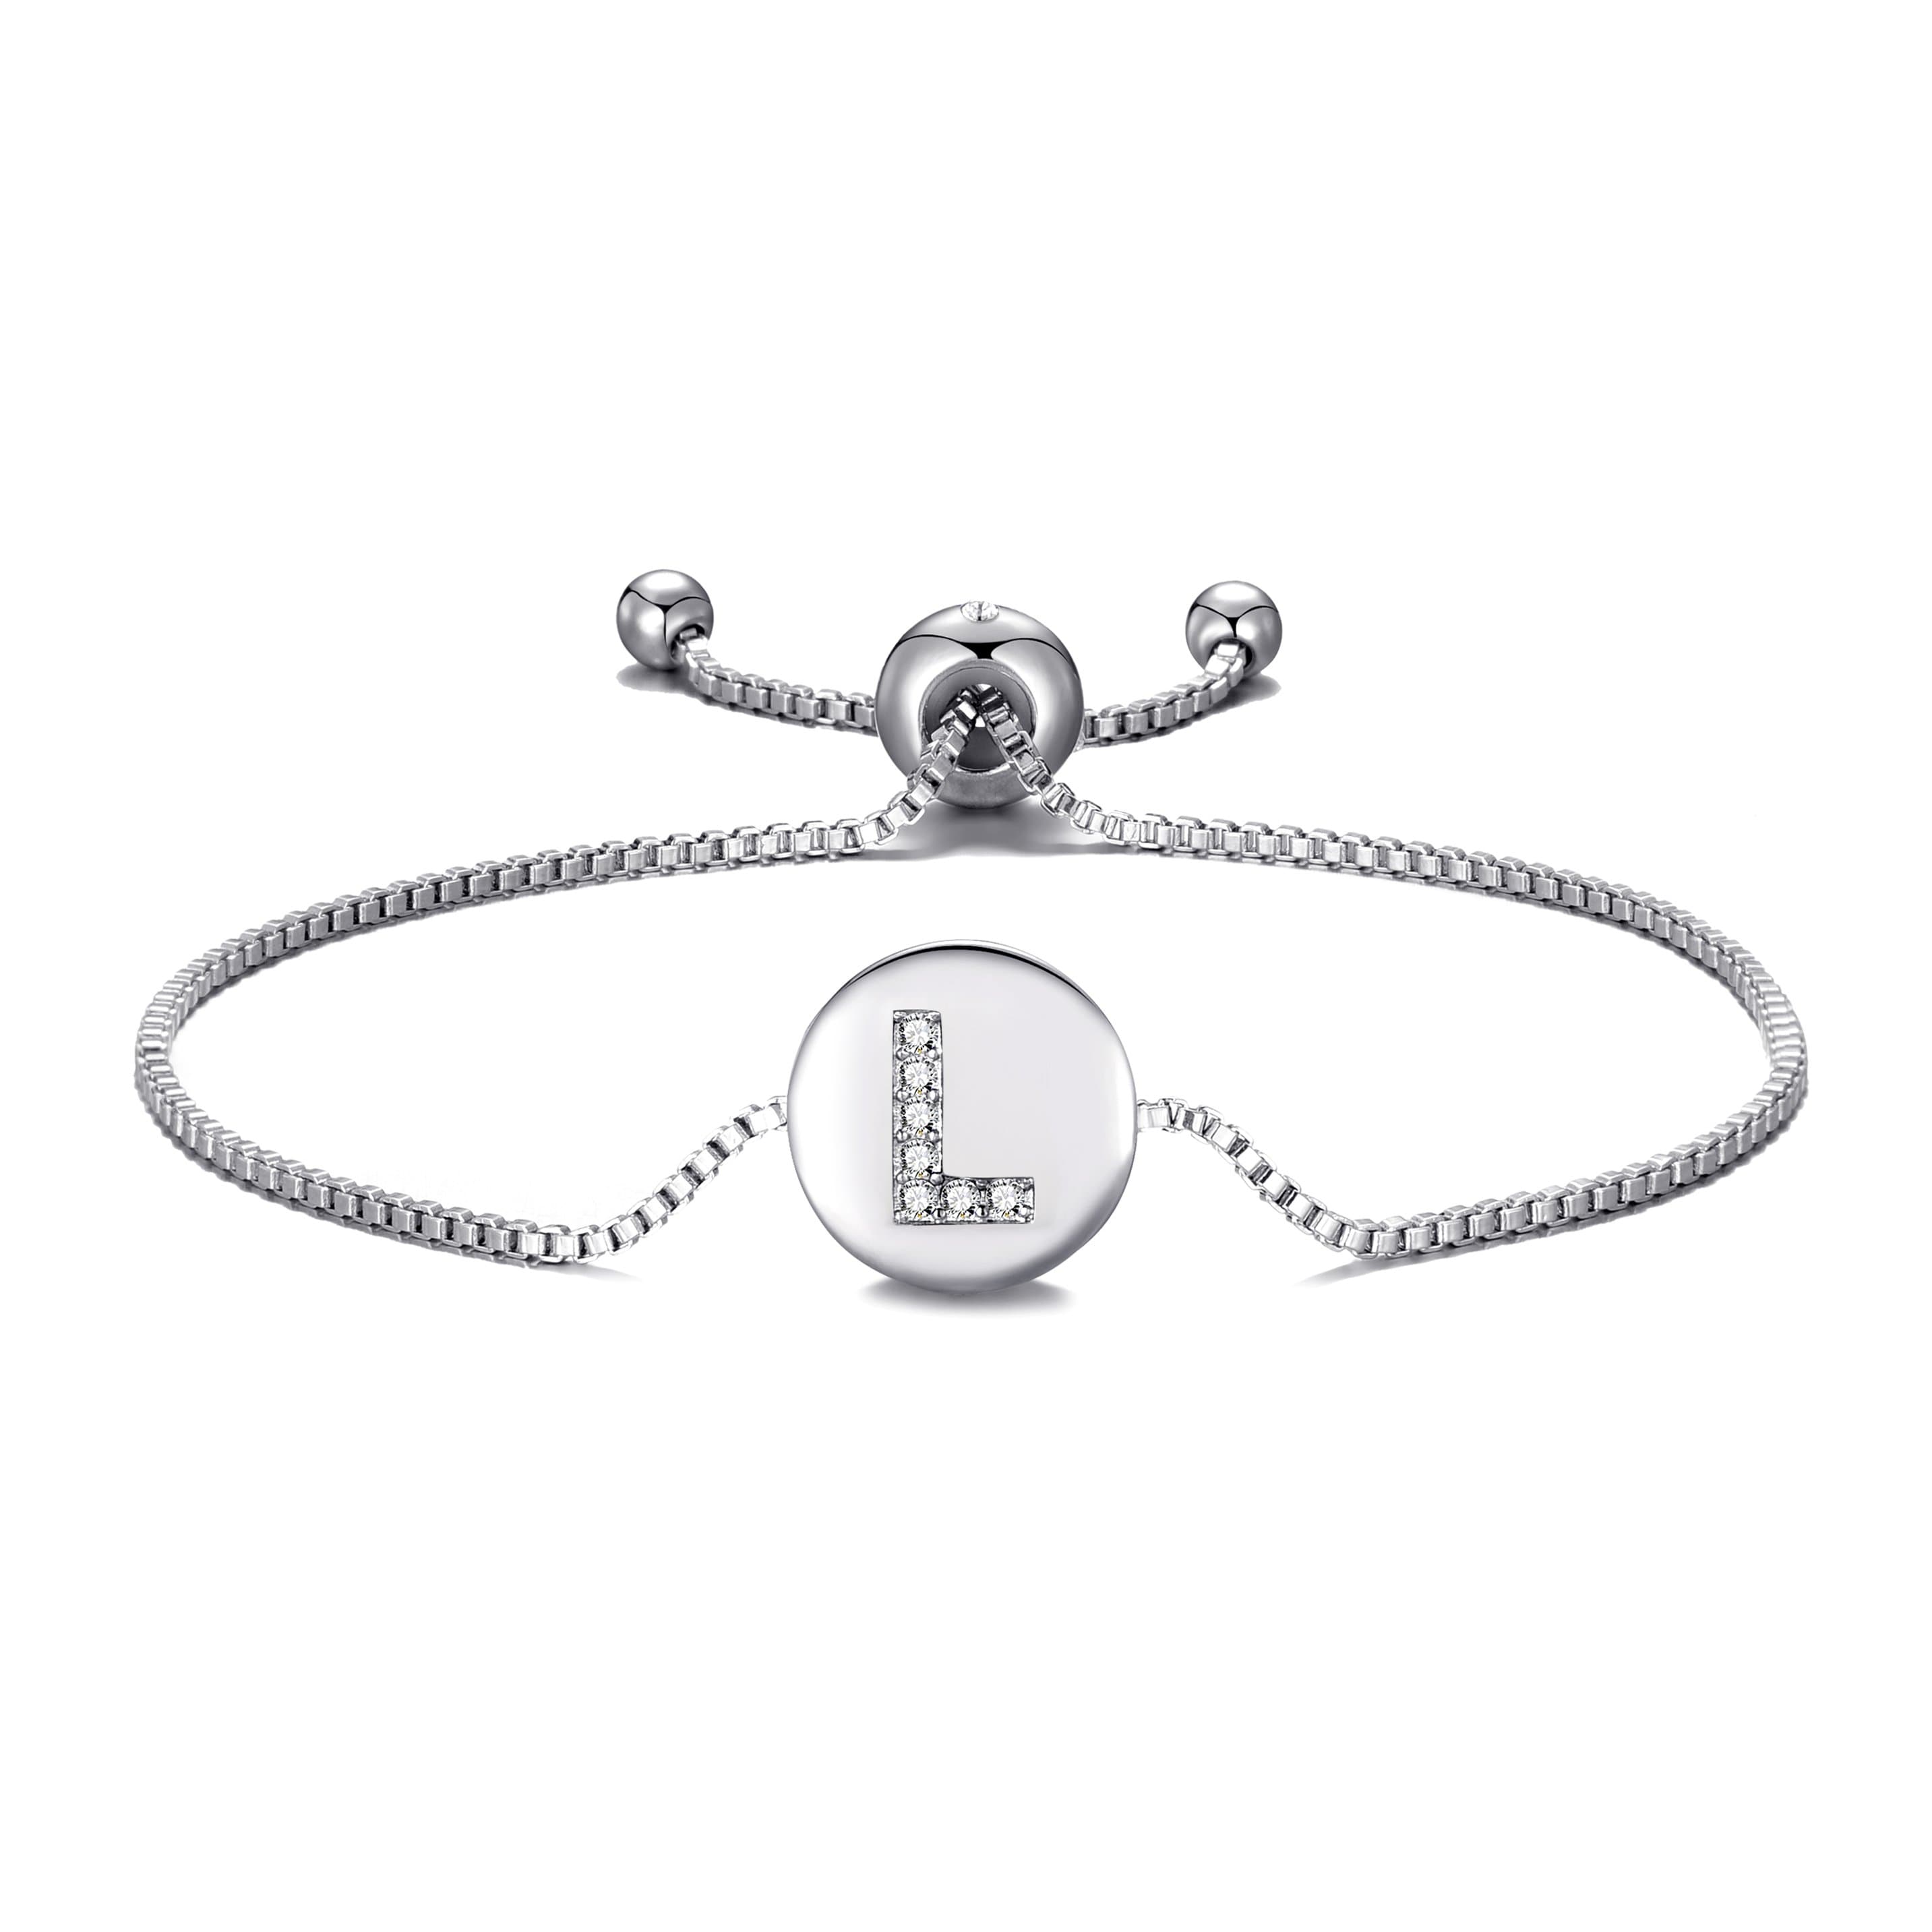 Initial Friendship Bracelet Letter L Created with Zircondia® Crystals by Philip Jones Jewellery